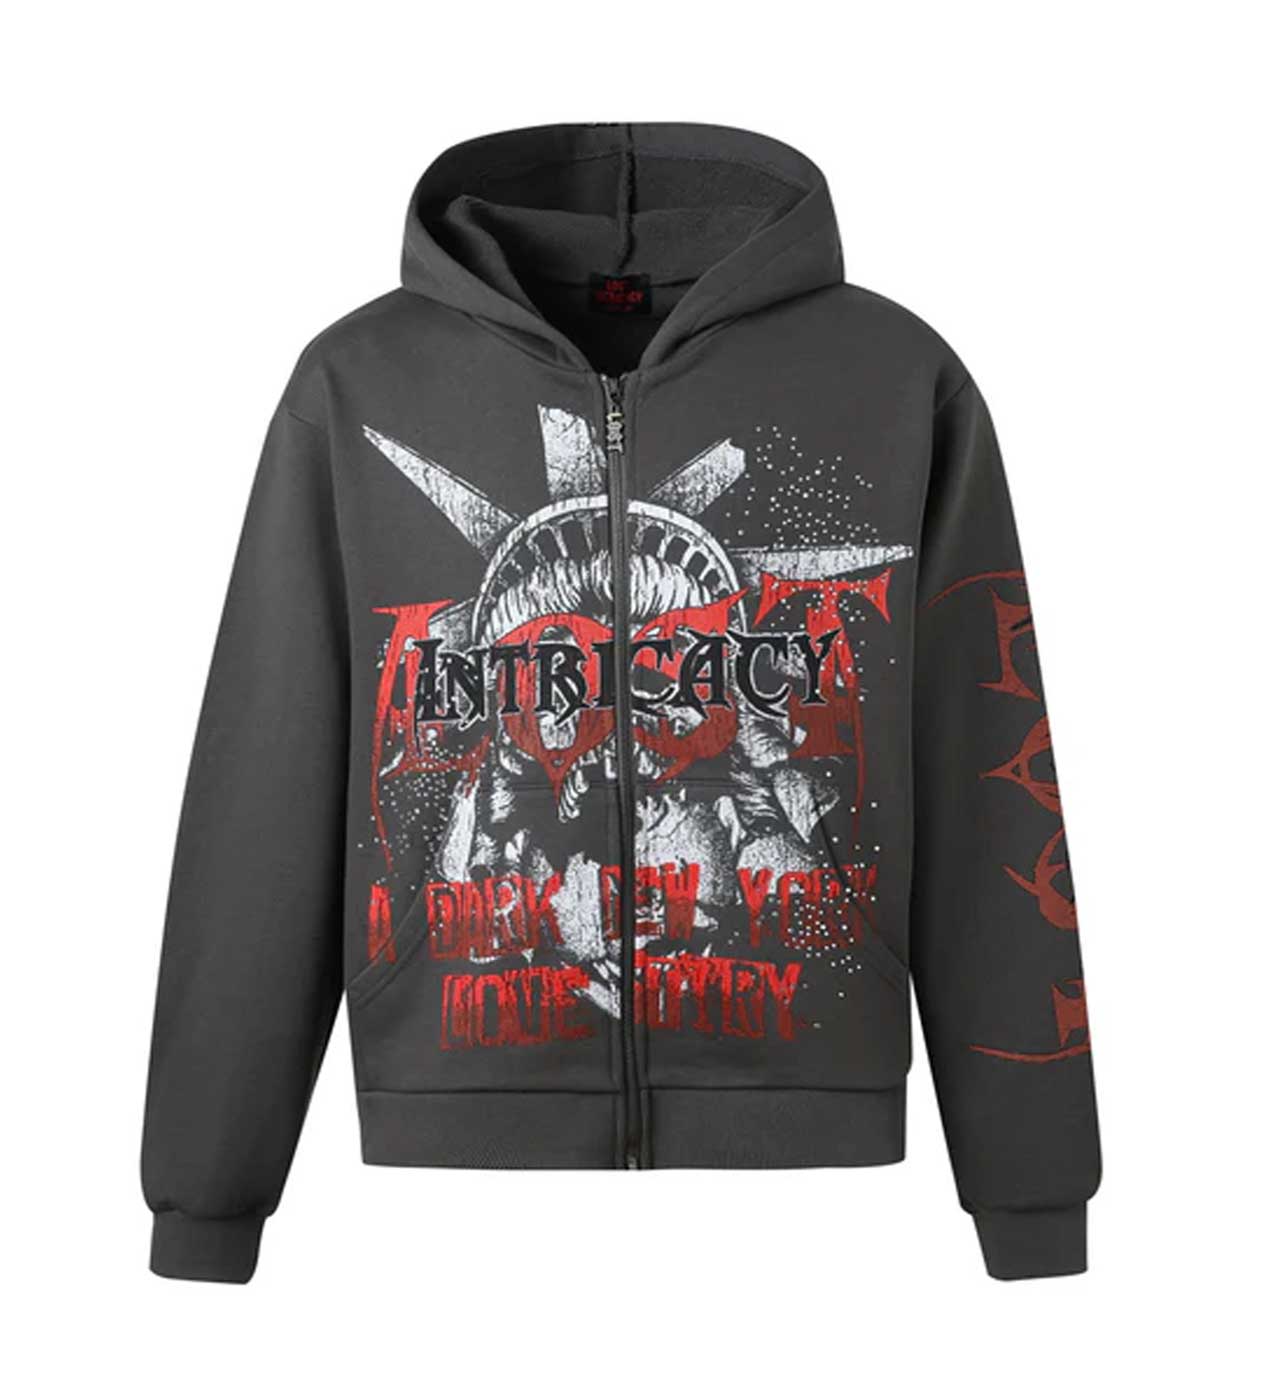 Lost Intricacy Dark City Zip Up front view